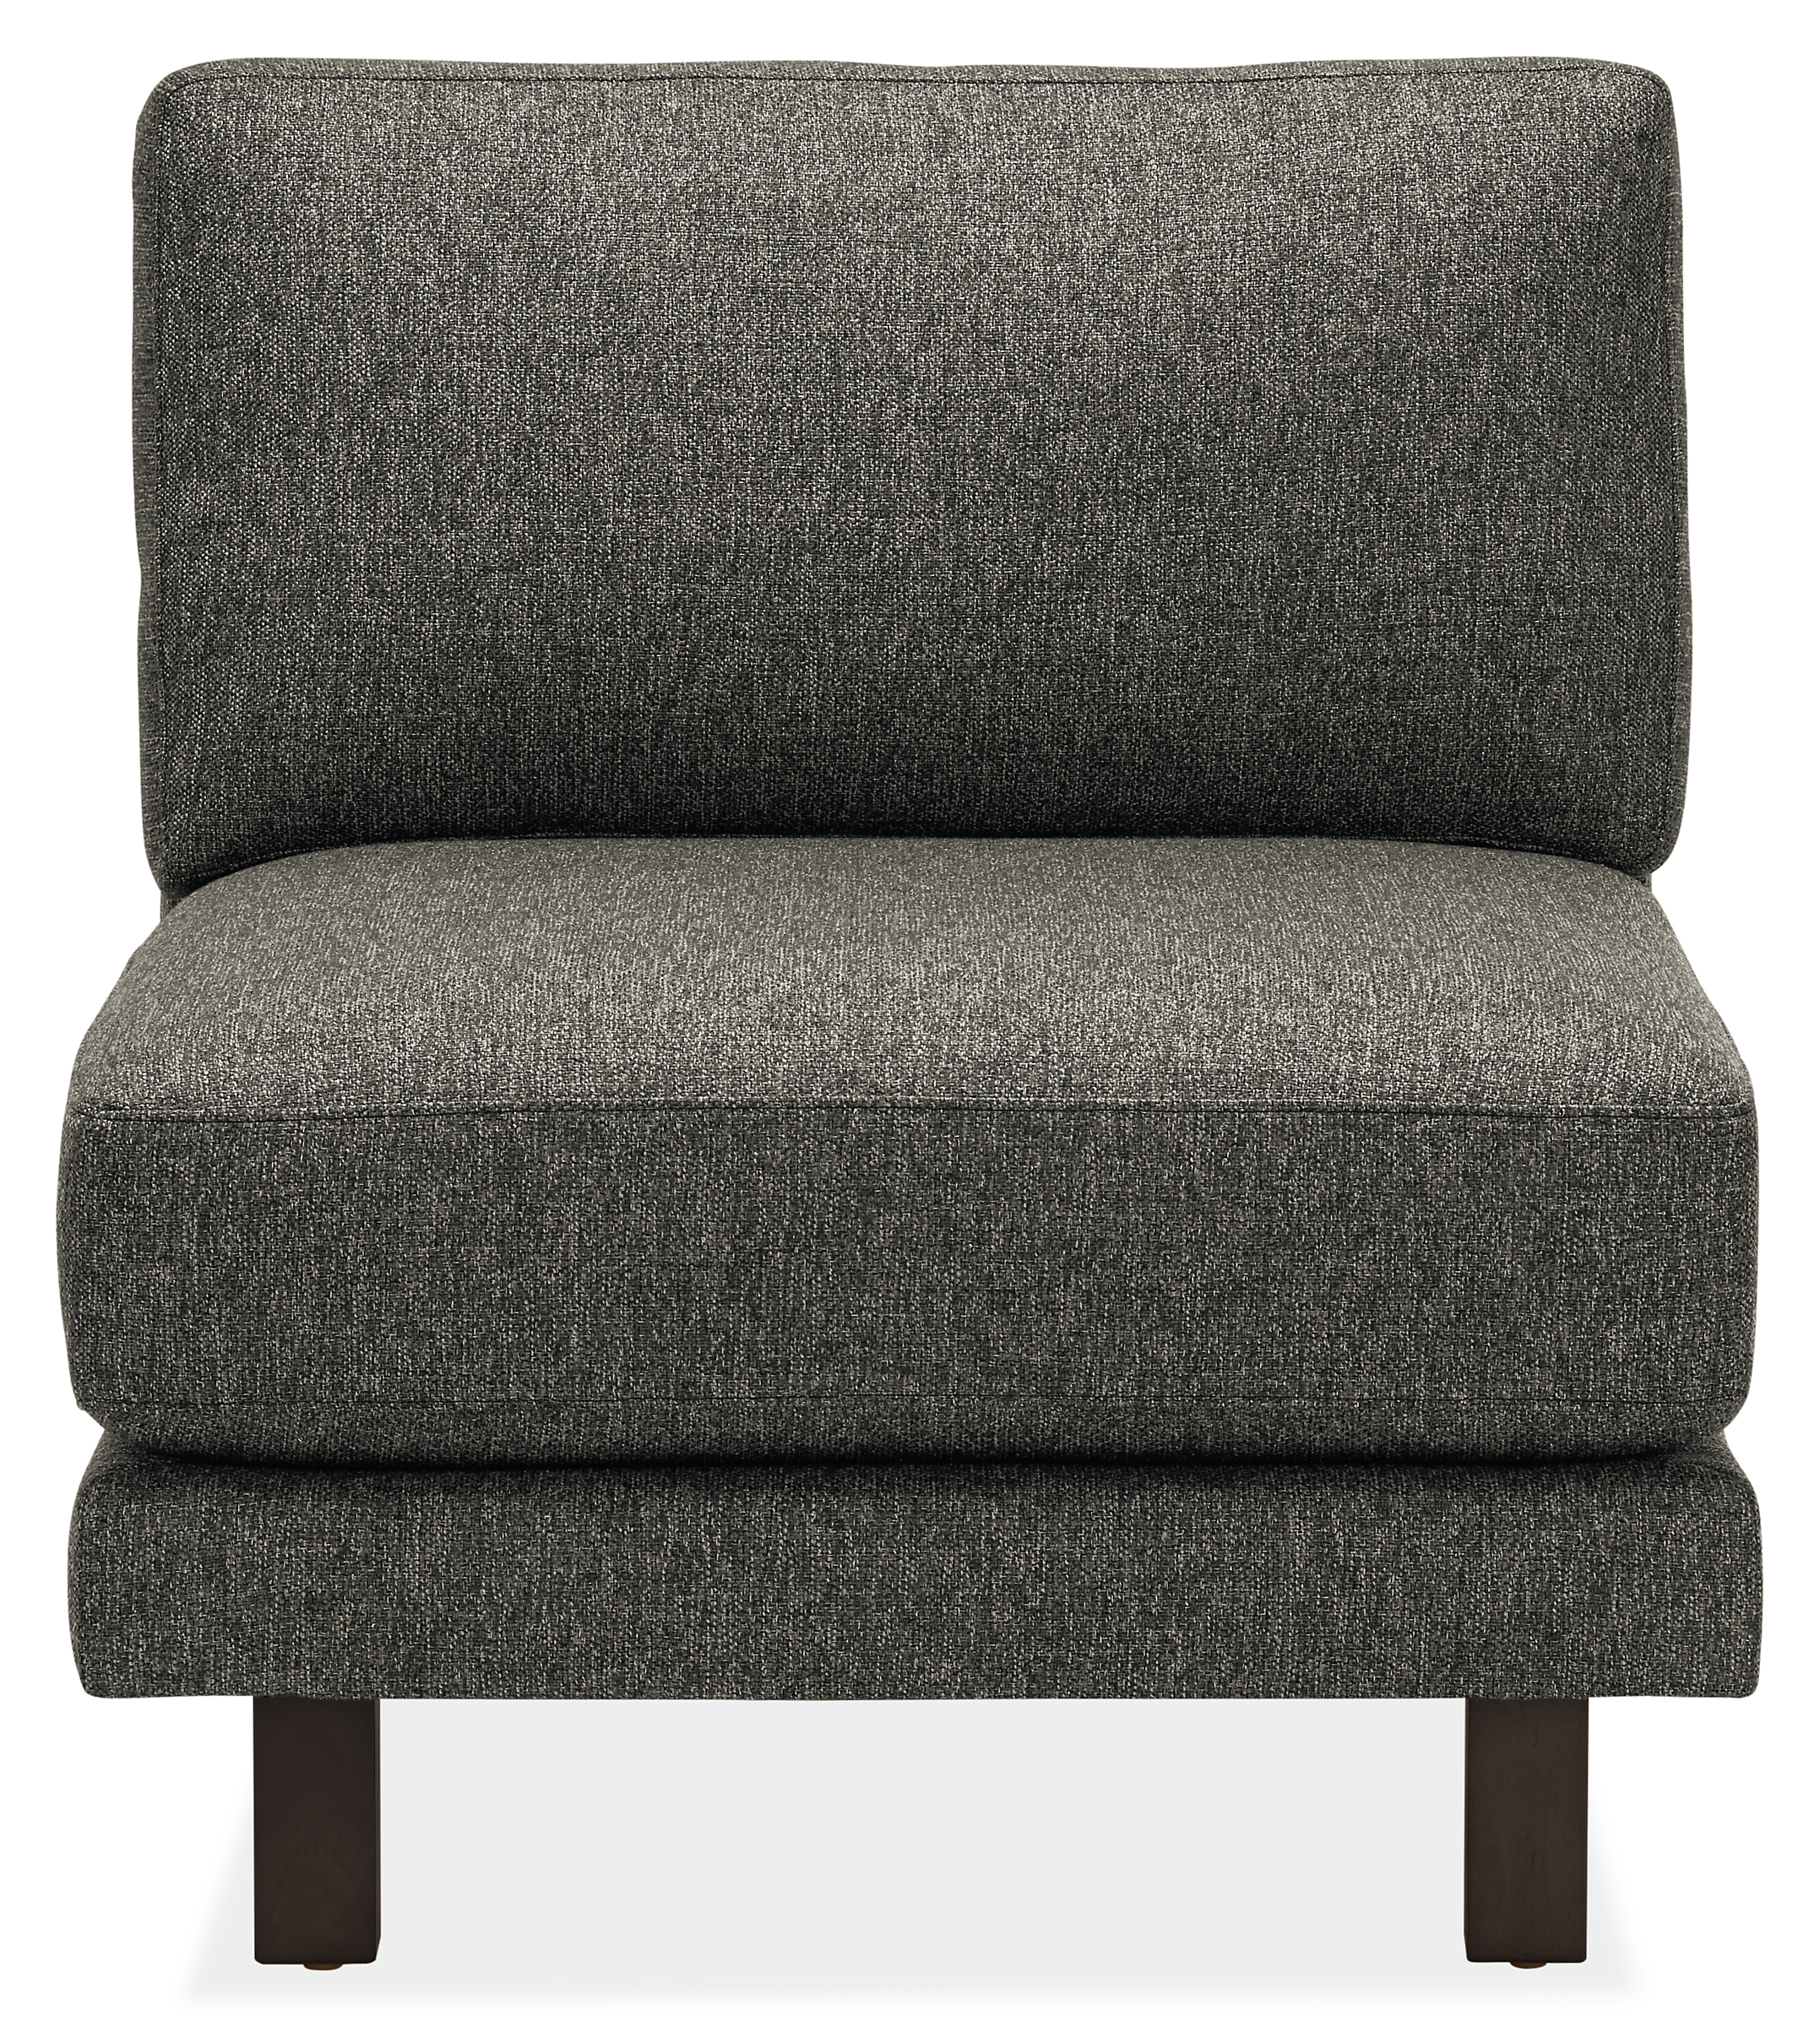 Front view of Cade Armless Chair in Tepic Fabric.